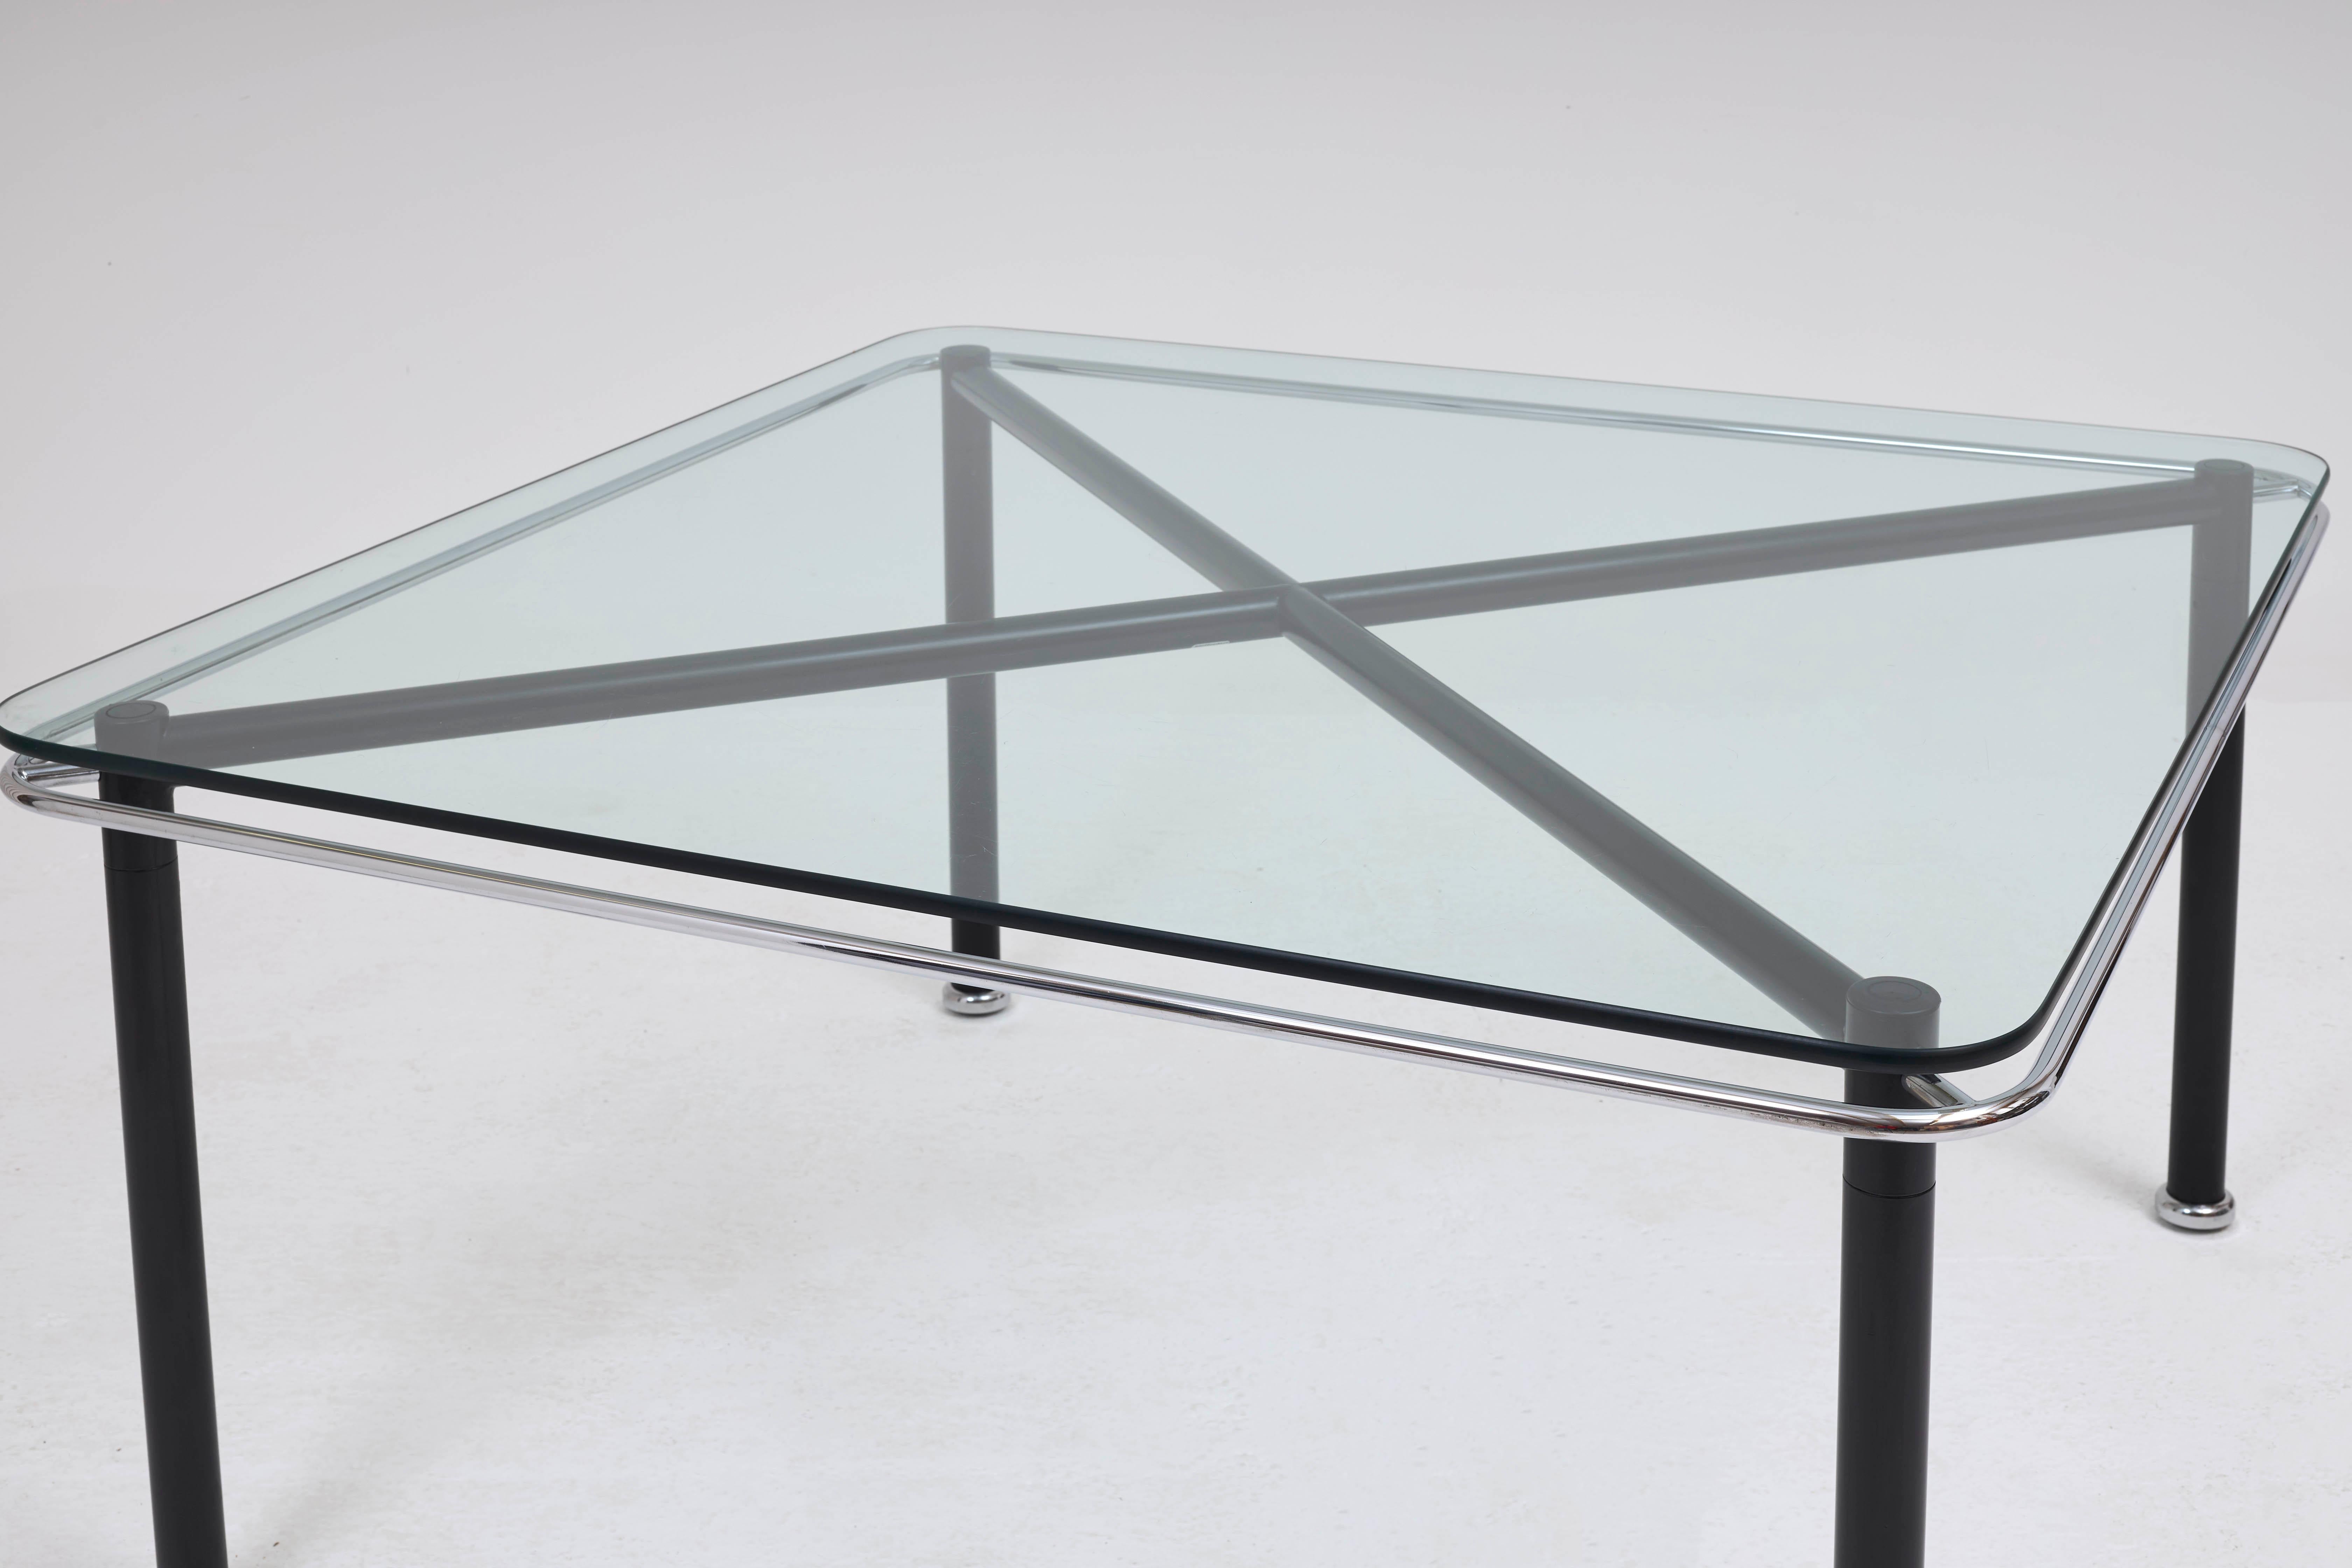 Designed by Sottsass Associati and produced by Bieffeplast circa 1980’s. The ‘Crossing’ table features a robust black powder coated tubular steel frame, chrome trimmings and toughened glass top. This rare example of Sottsass design is not found